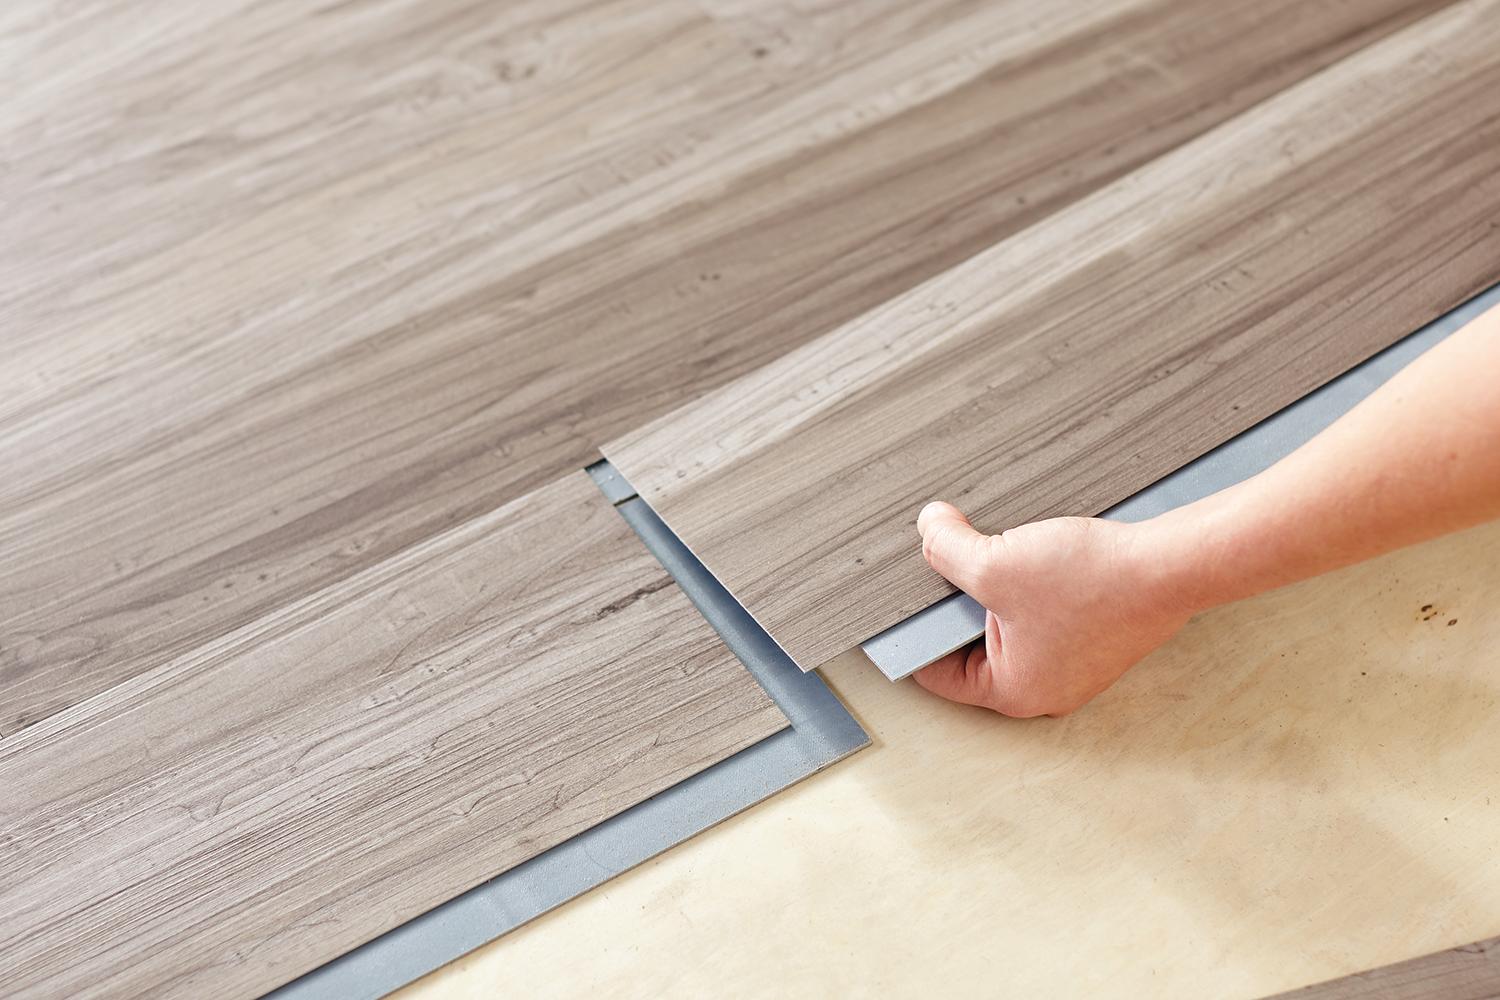 How To Lay Down Vinyl Flooring In Your, How Much Does Vinyl Flooring Cost To Install